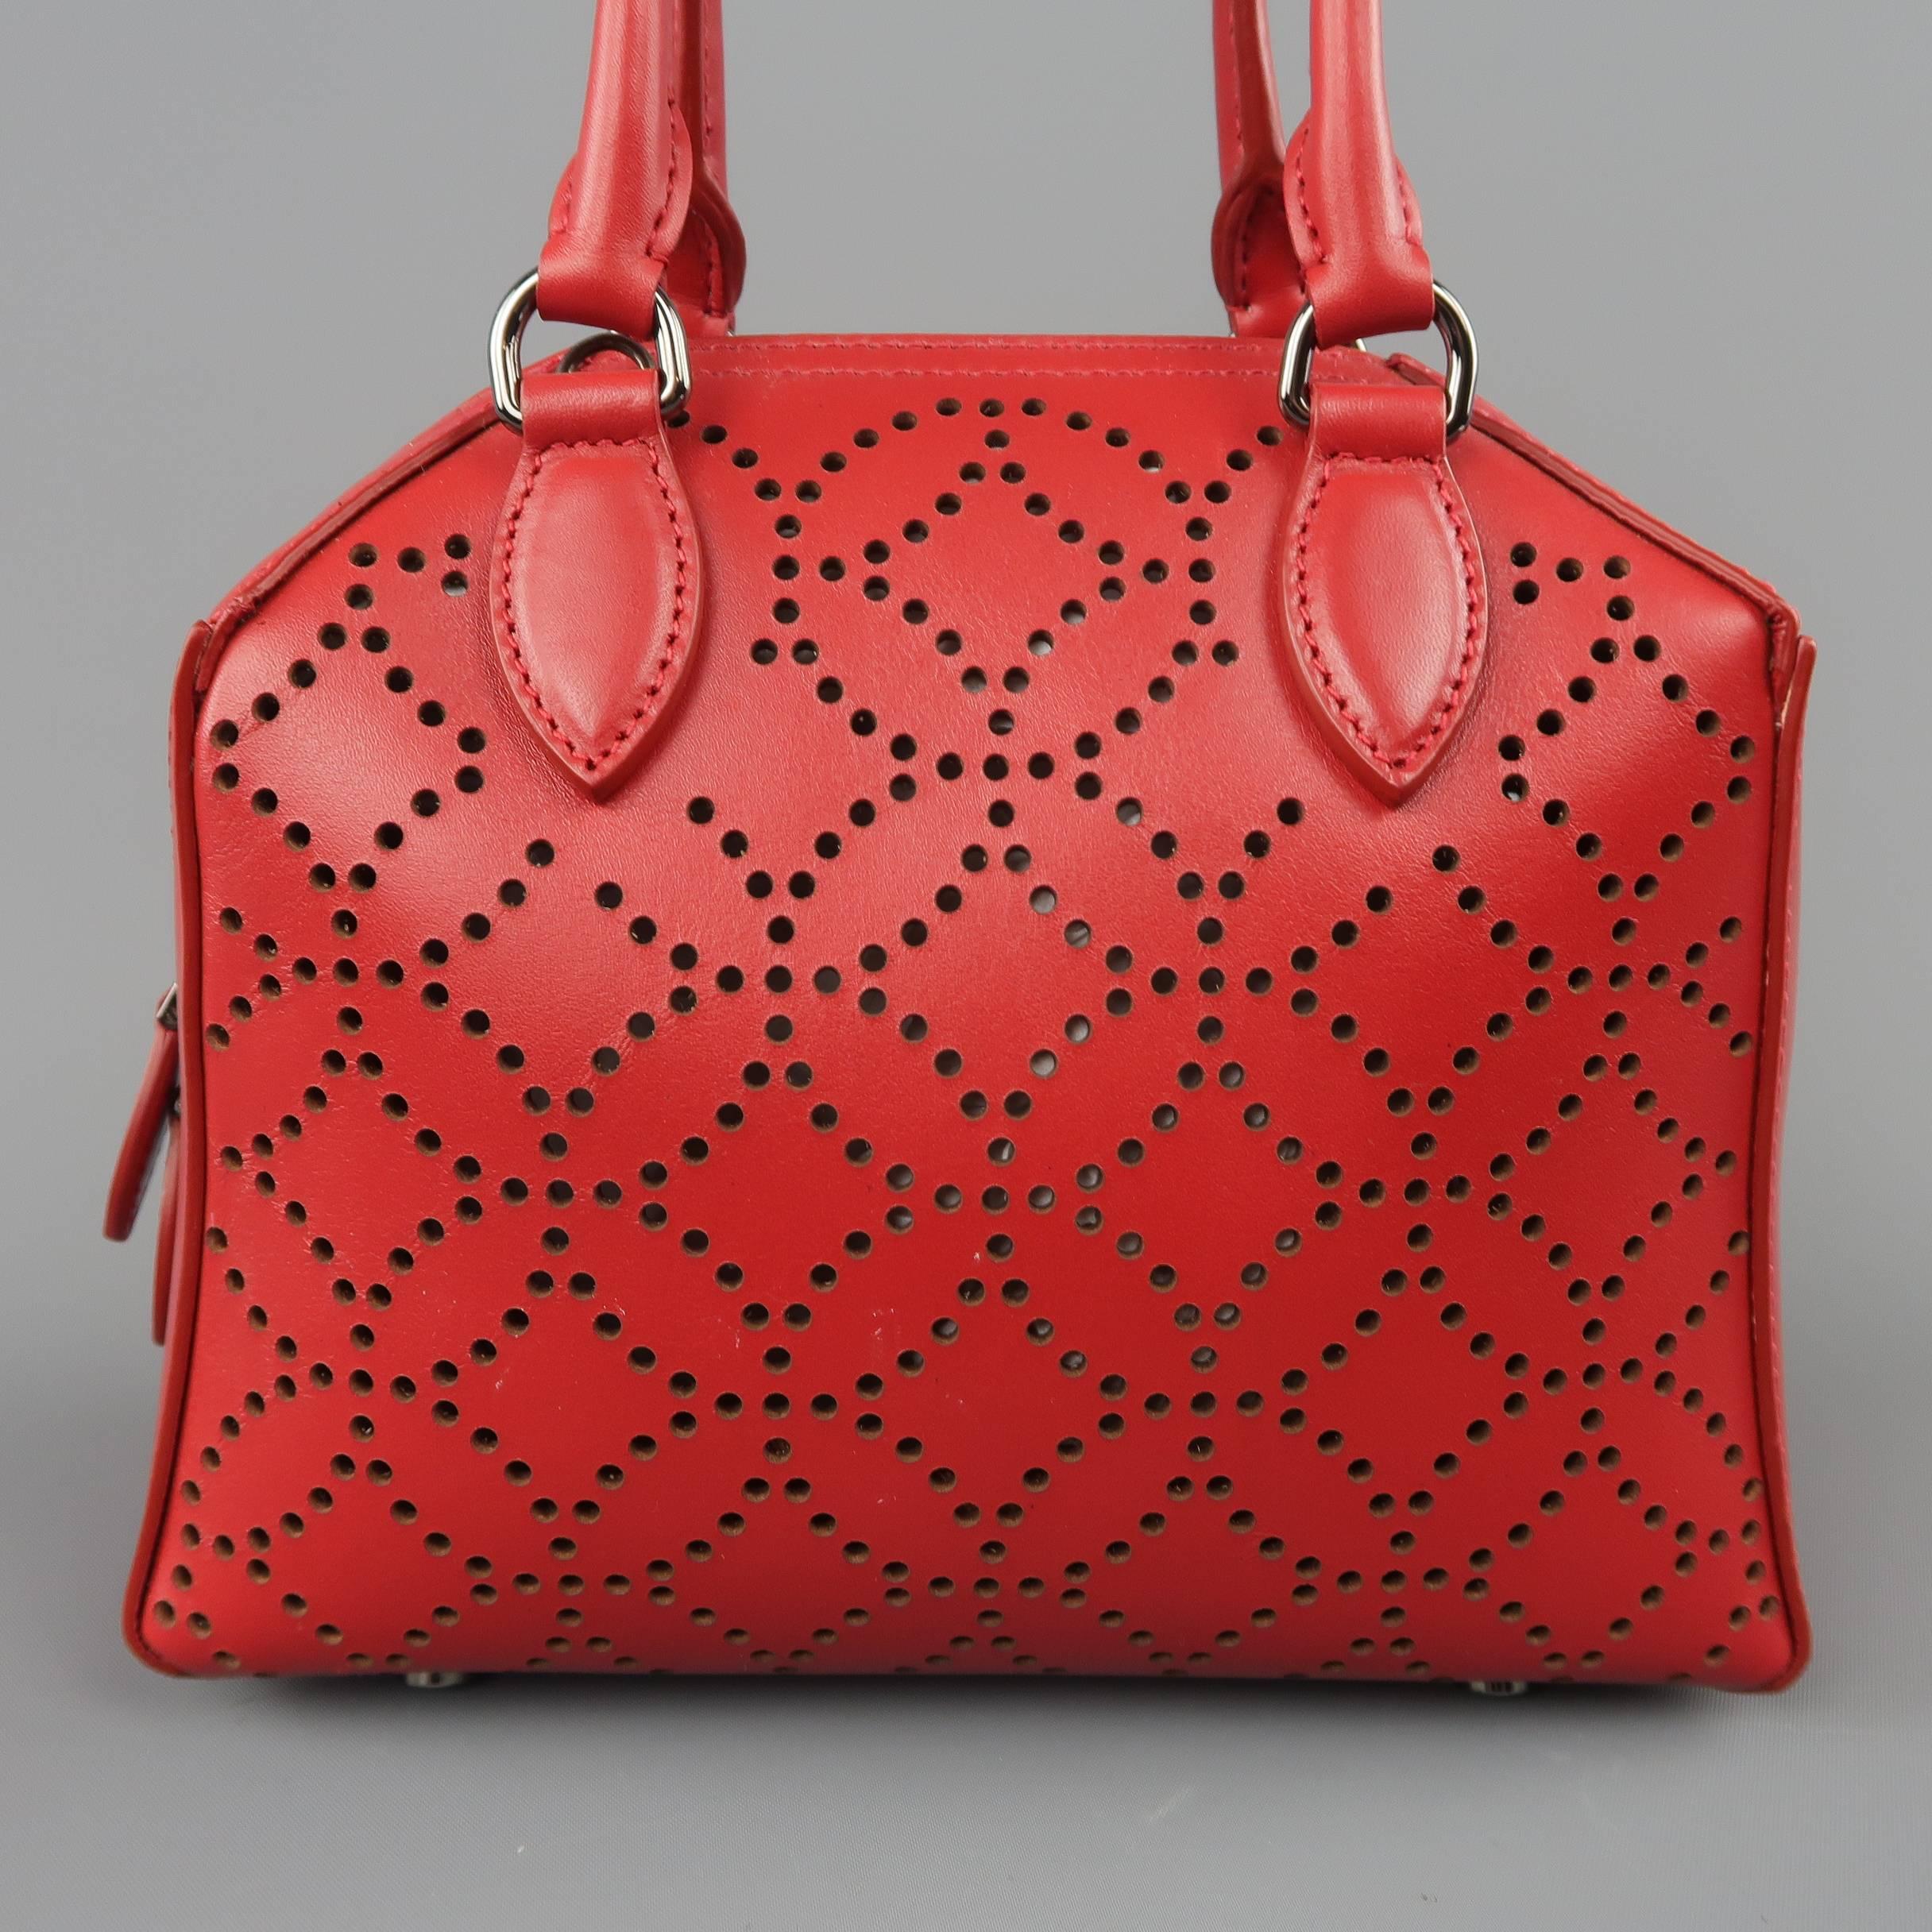 ALAIA mini bag comes in red laser cut perforated pattern leather with double covered top handles, double zip top, polished gunmetal tone hardware, internal mirror tag, and detachable crossbody strap. Made in Italy.
 
Excellent Pre-Owned Condition.
